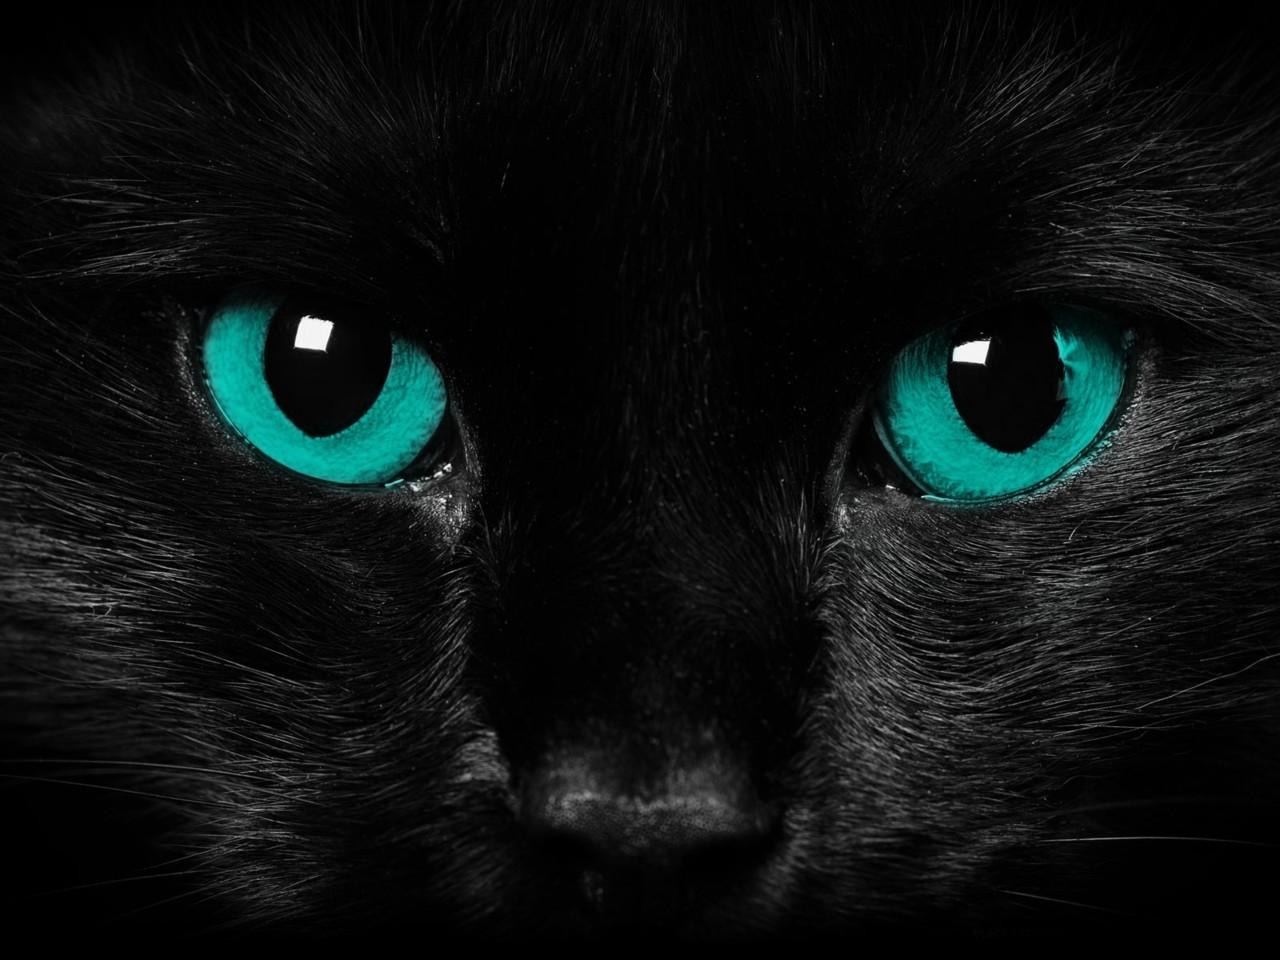 A Cat with Blue and Green Logo - What color does your cat see? Cats IncValley Cats Inc